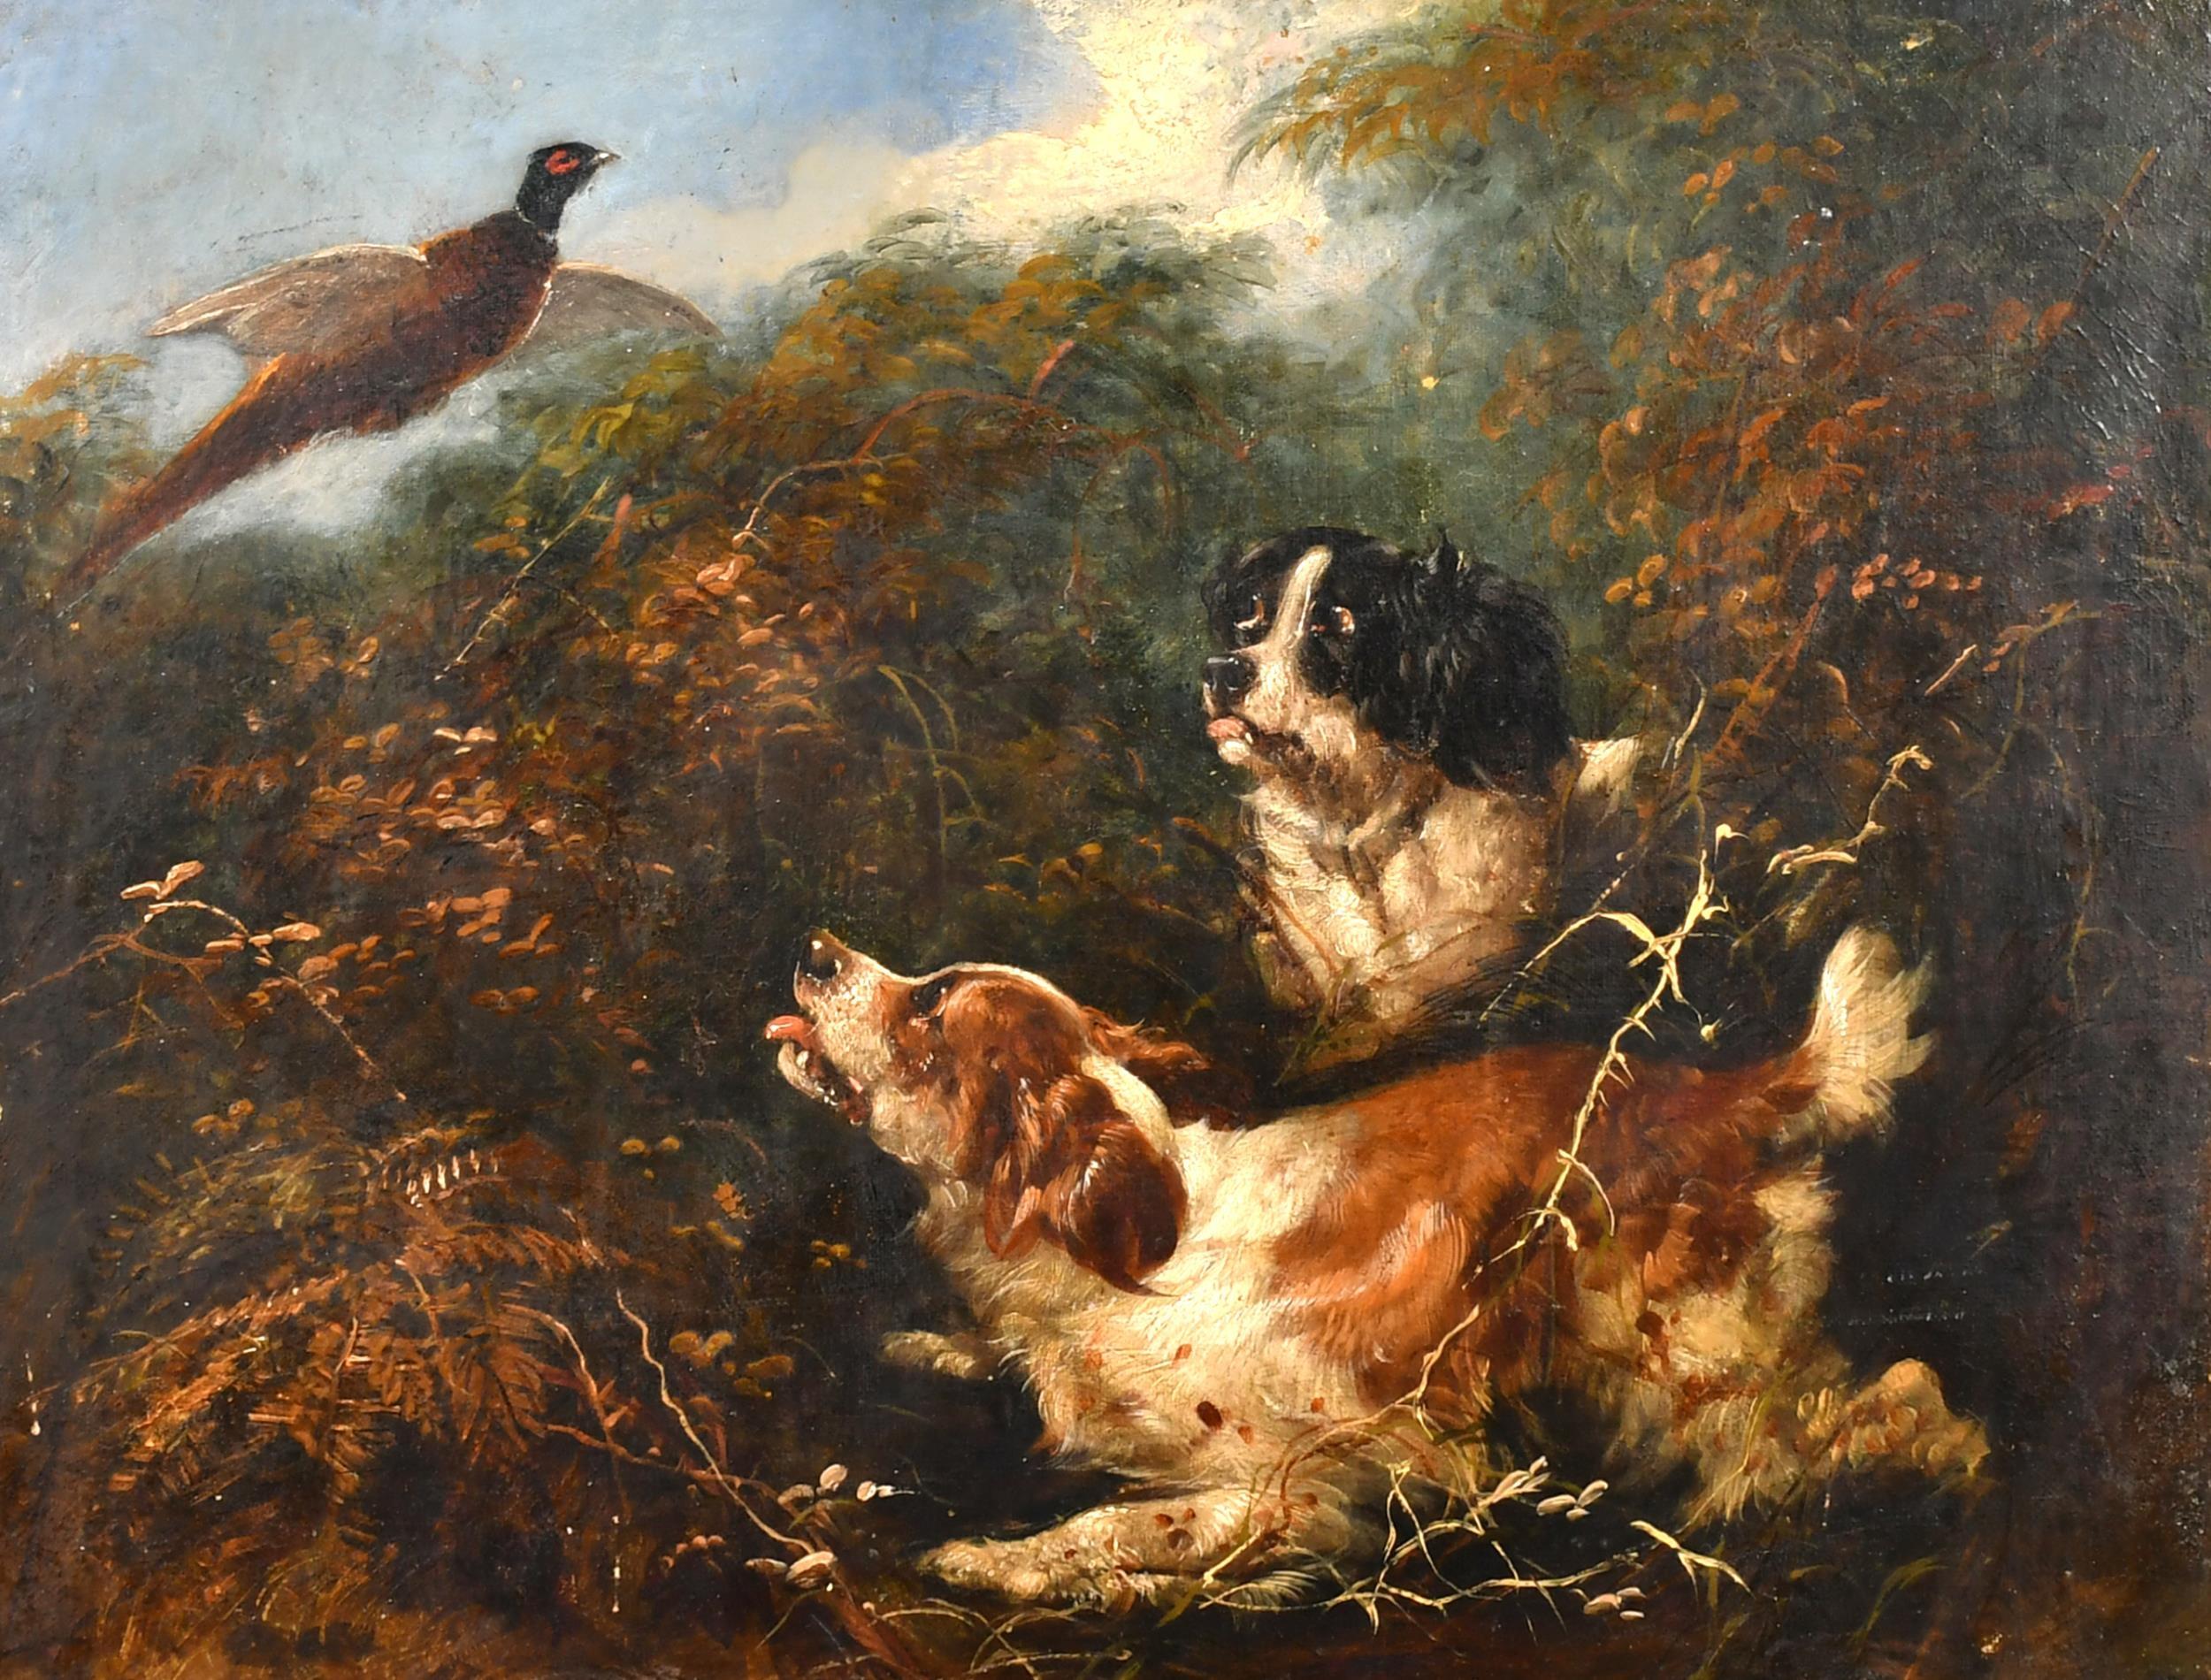 Circle of George Armfield (1808-1893) Animal Painting - Victorian Sporting Oil Painting Spaniel Dogs Putting up Pheasant in Landscape